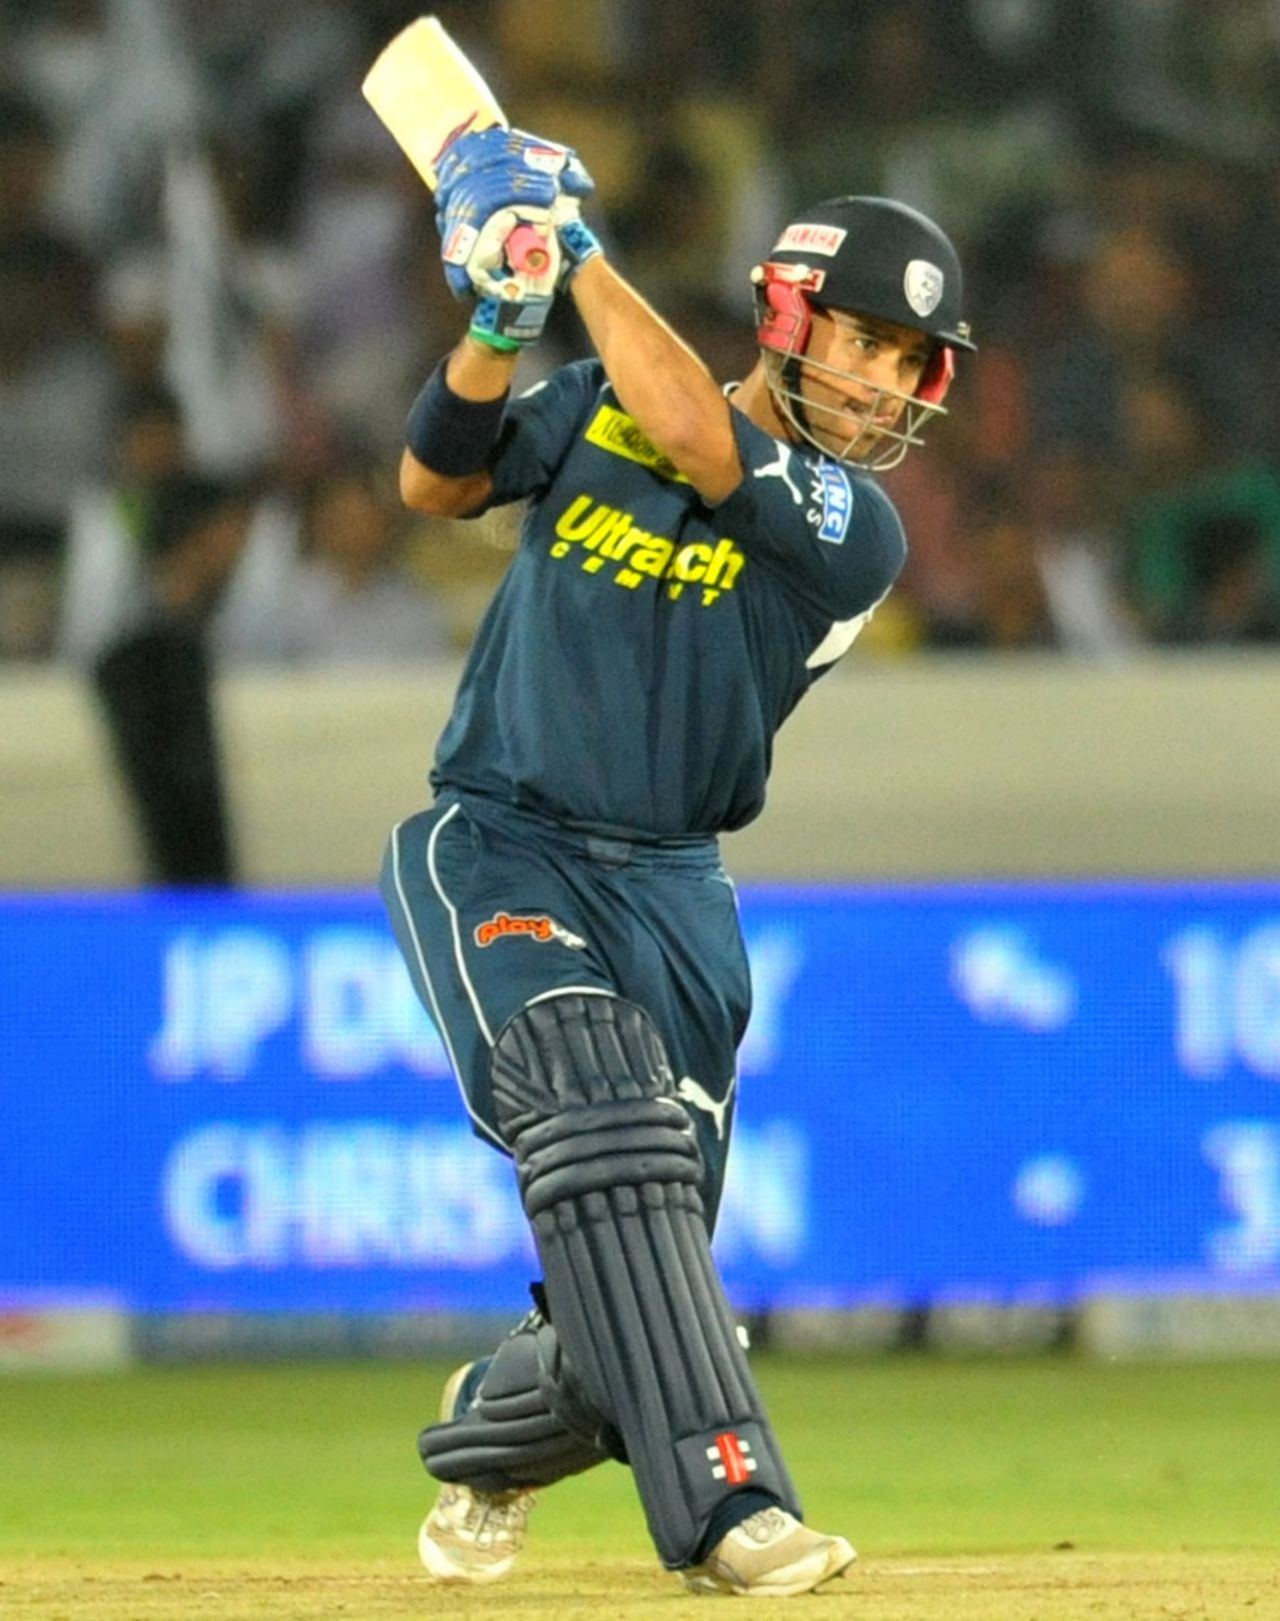 JP Duminy drives hard through the covers, Deccan Chargers v Delhi Daredevils, IPL 2011, Hyderabad, May 5, 2011